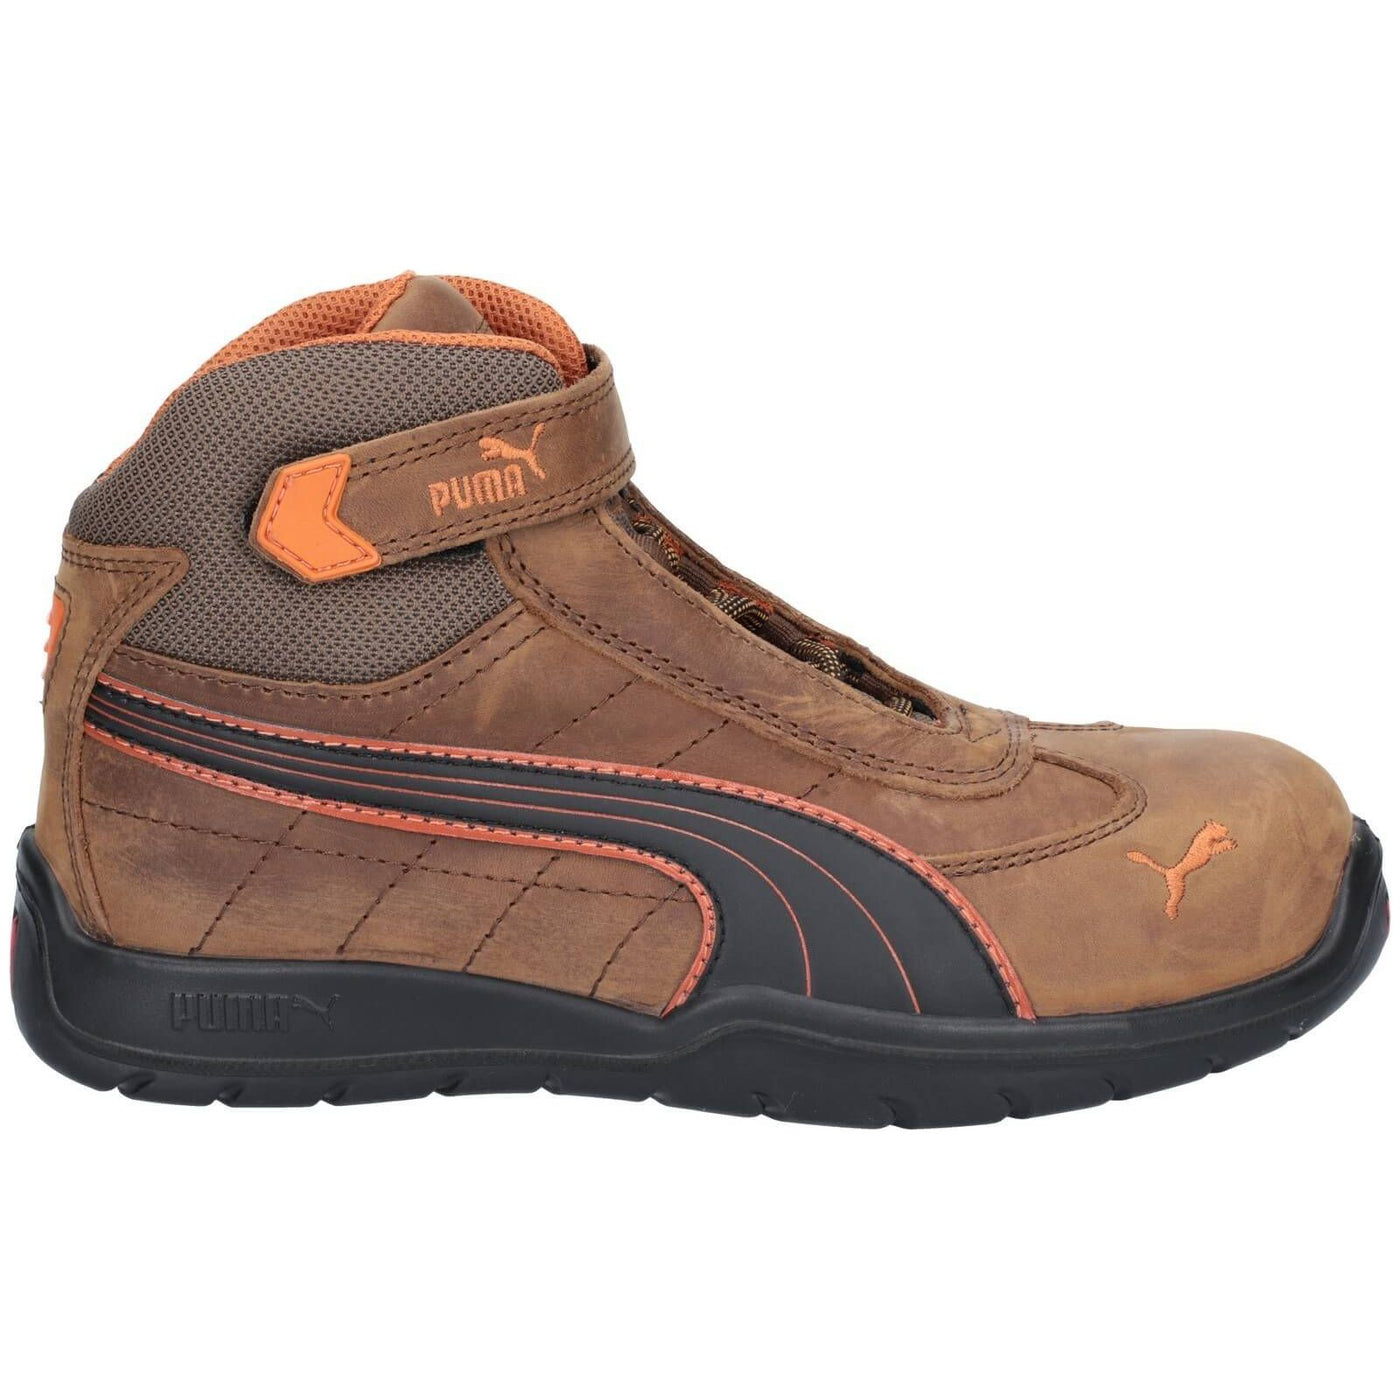 Puma Indy Touch-Fastening Safety Boots-Brown-4